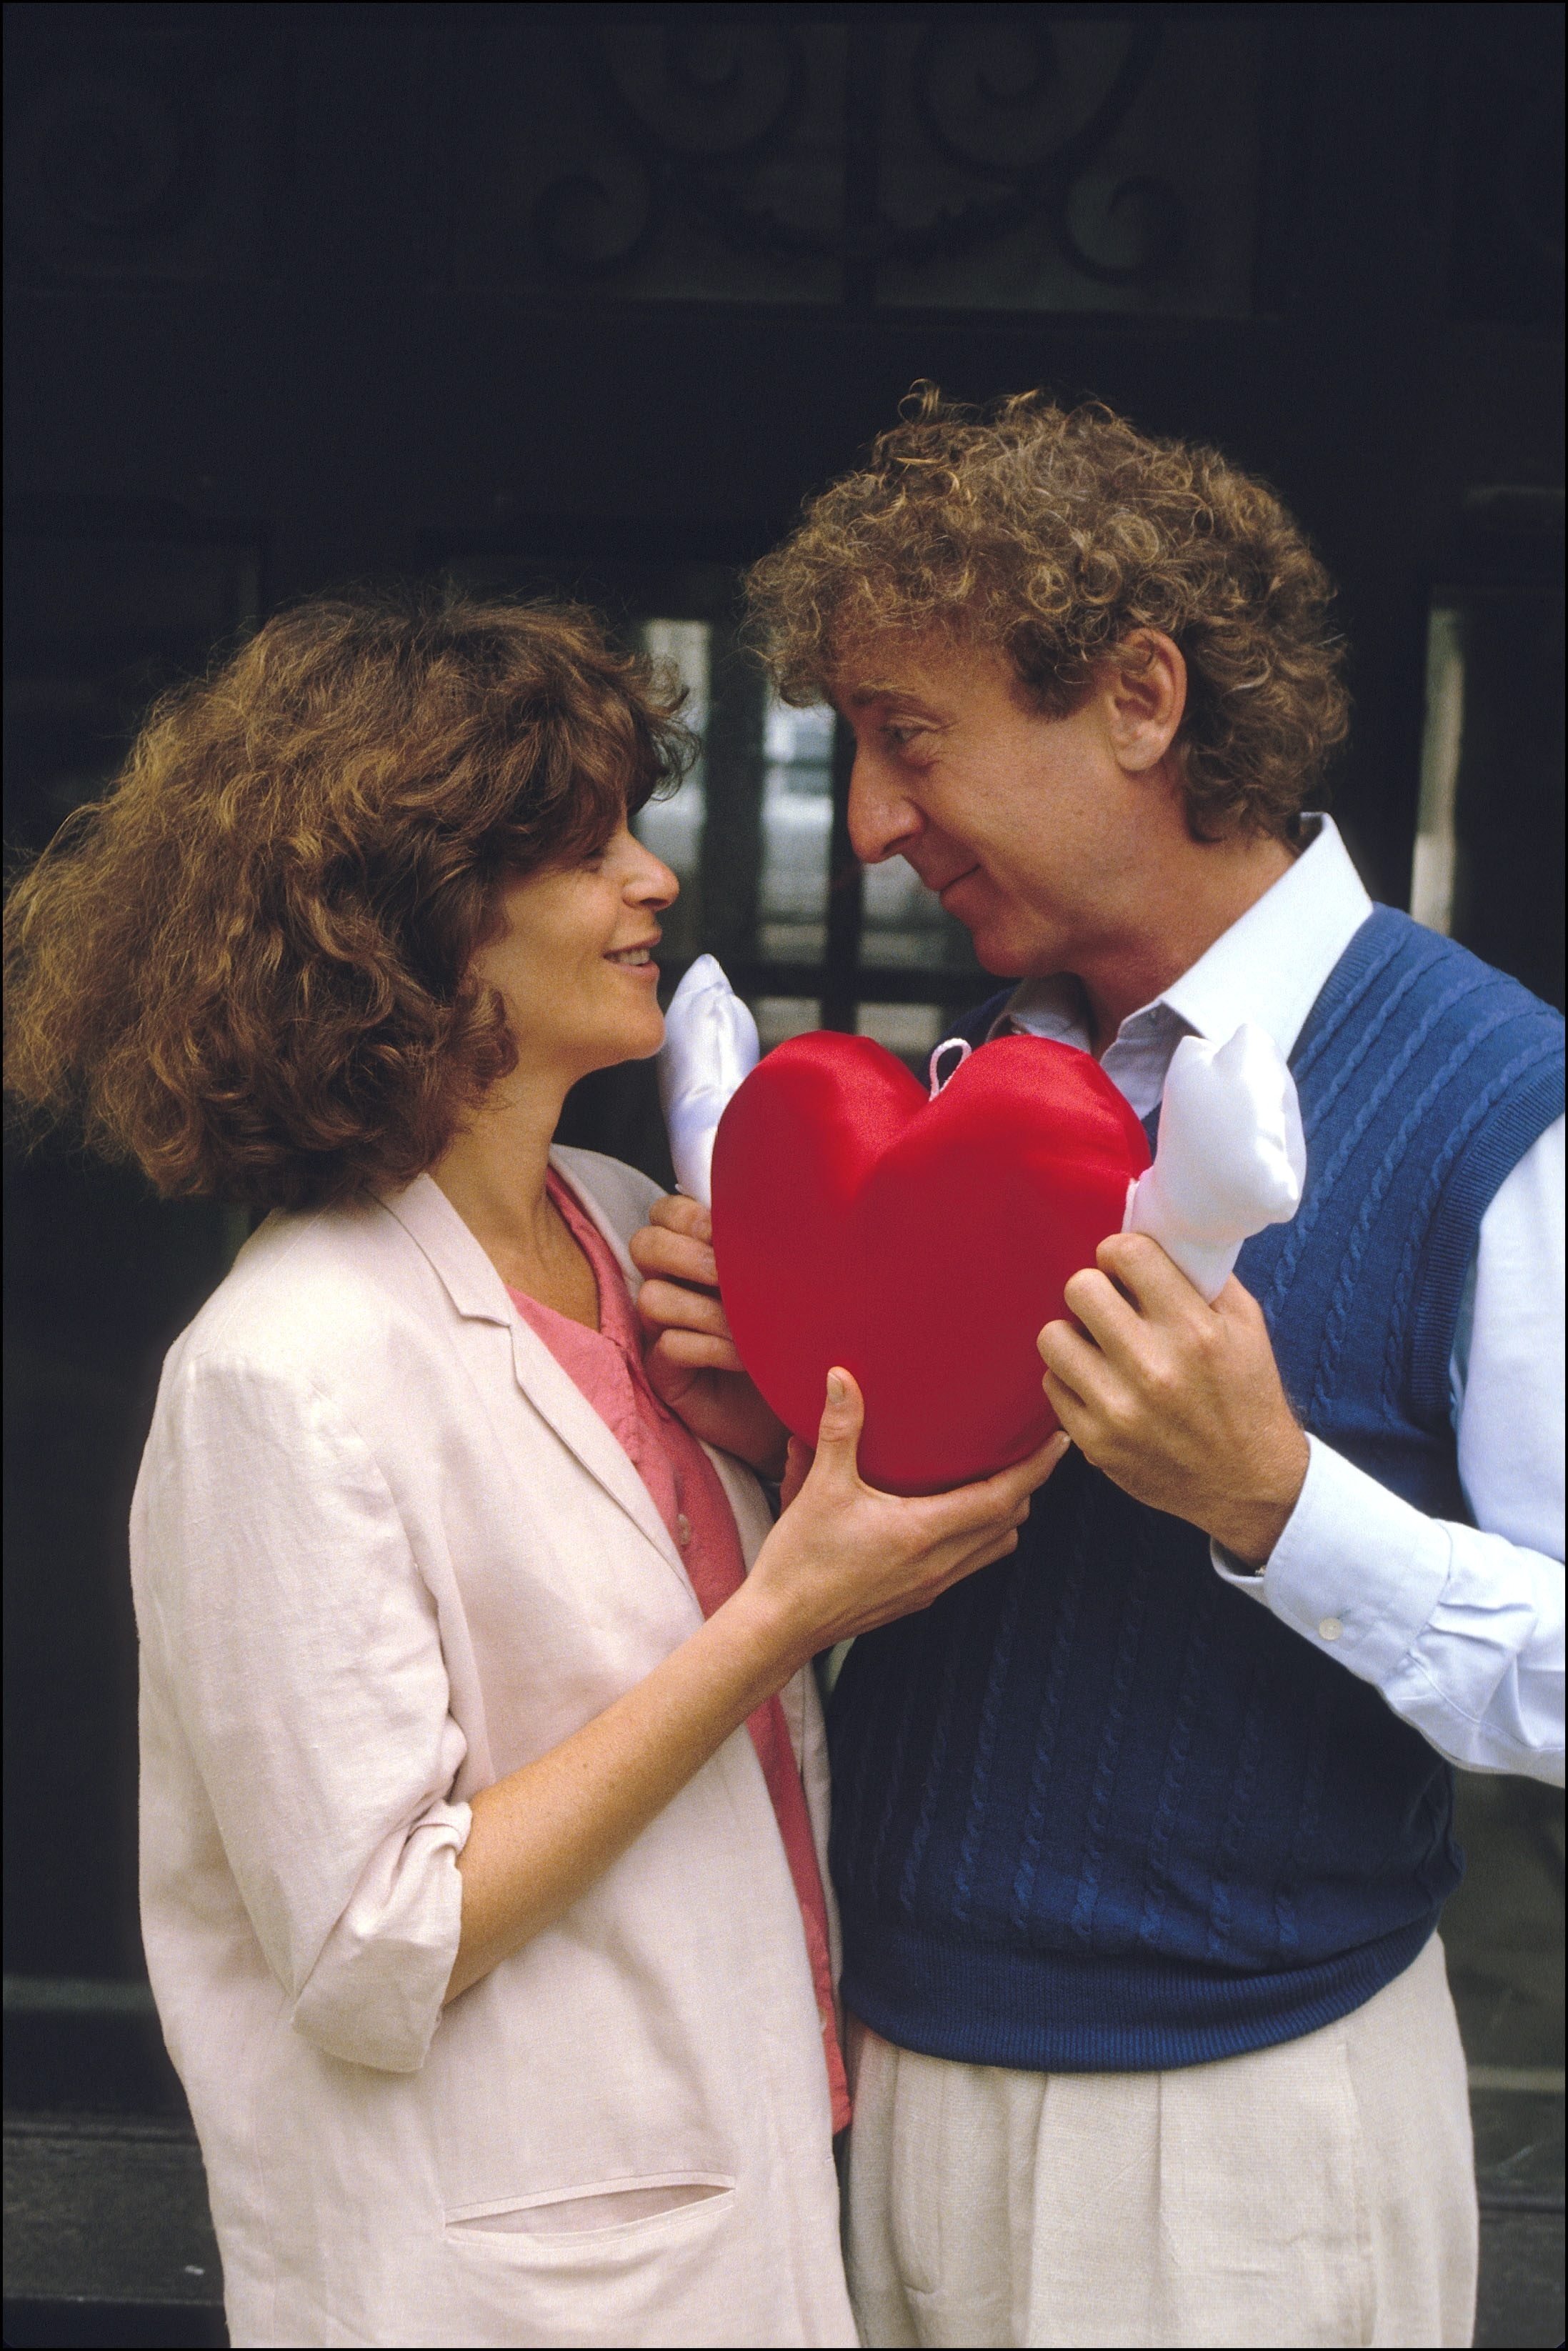 Wilder and Radner holding a red heart together during the 1980s. | Photo Getty Images